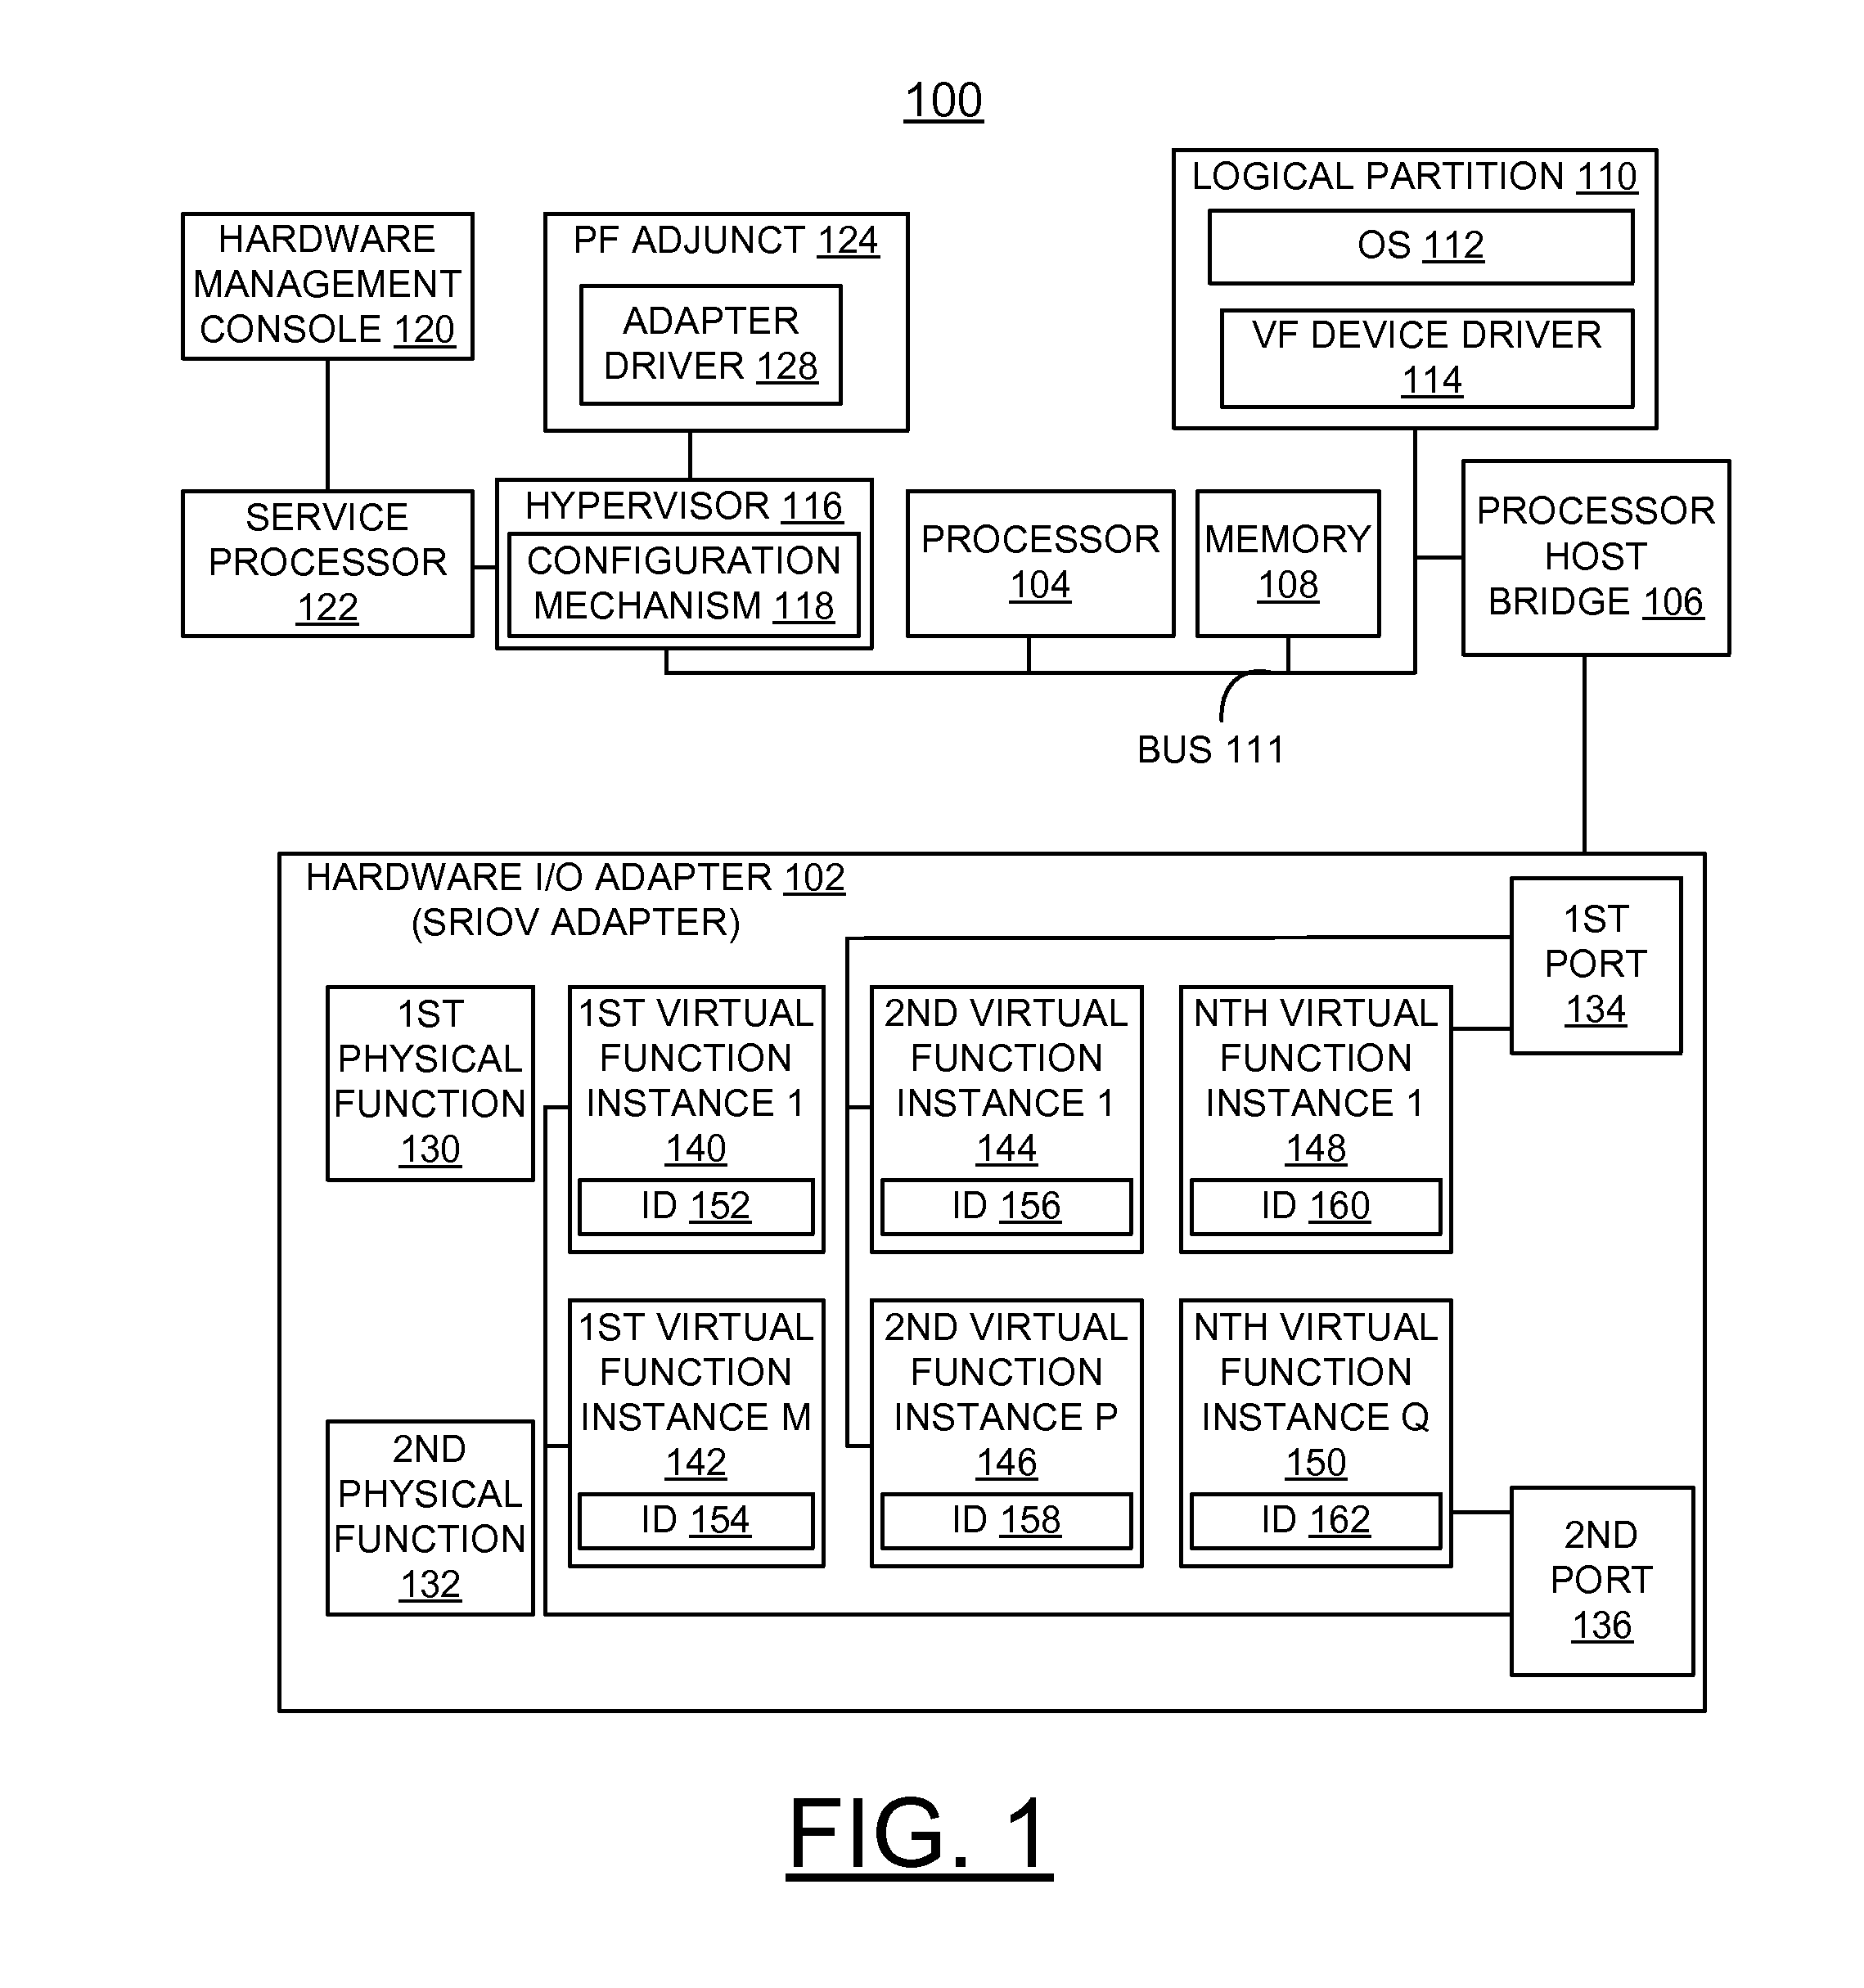 Implementing distributed debug data collection and analysis for a shared adapter in a virtualized system